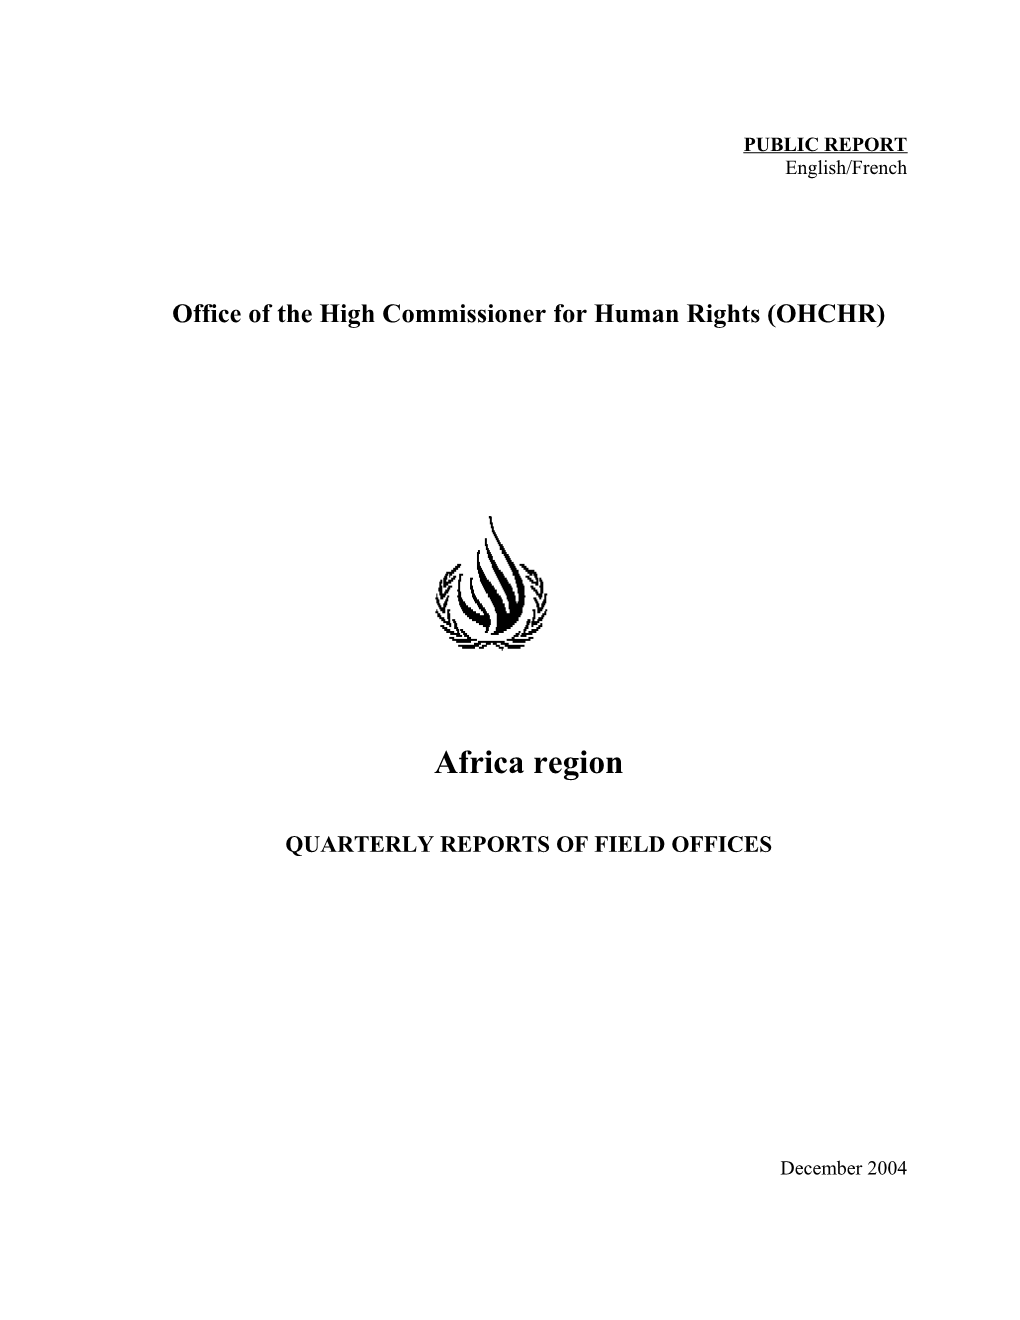 Office of the High Commissioner for Human Rights (OHCHR)